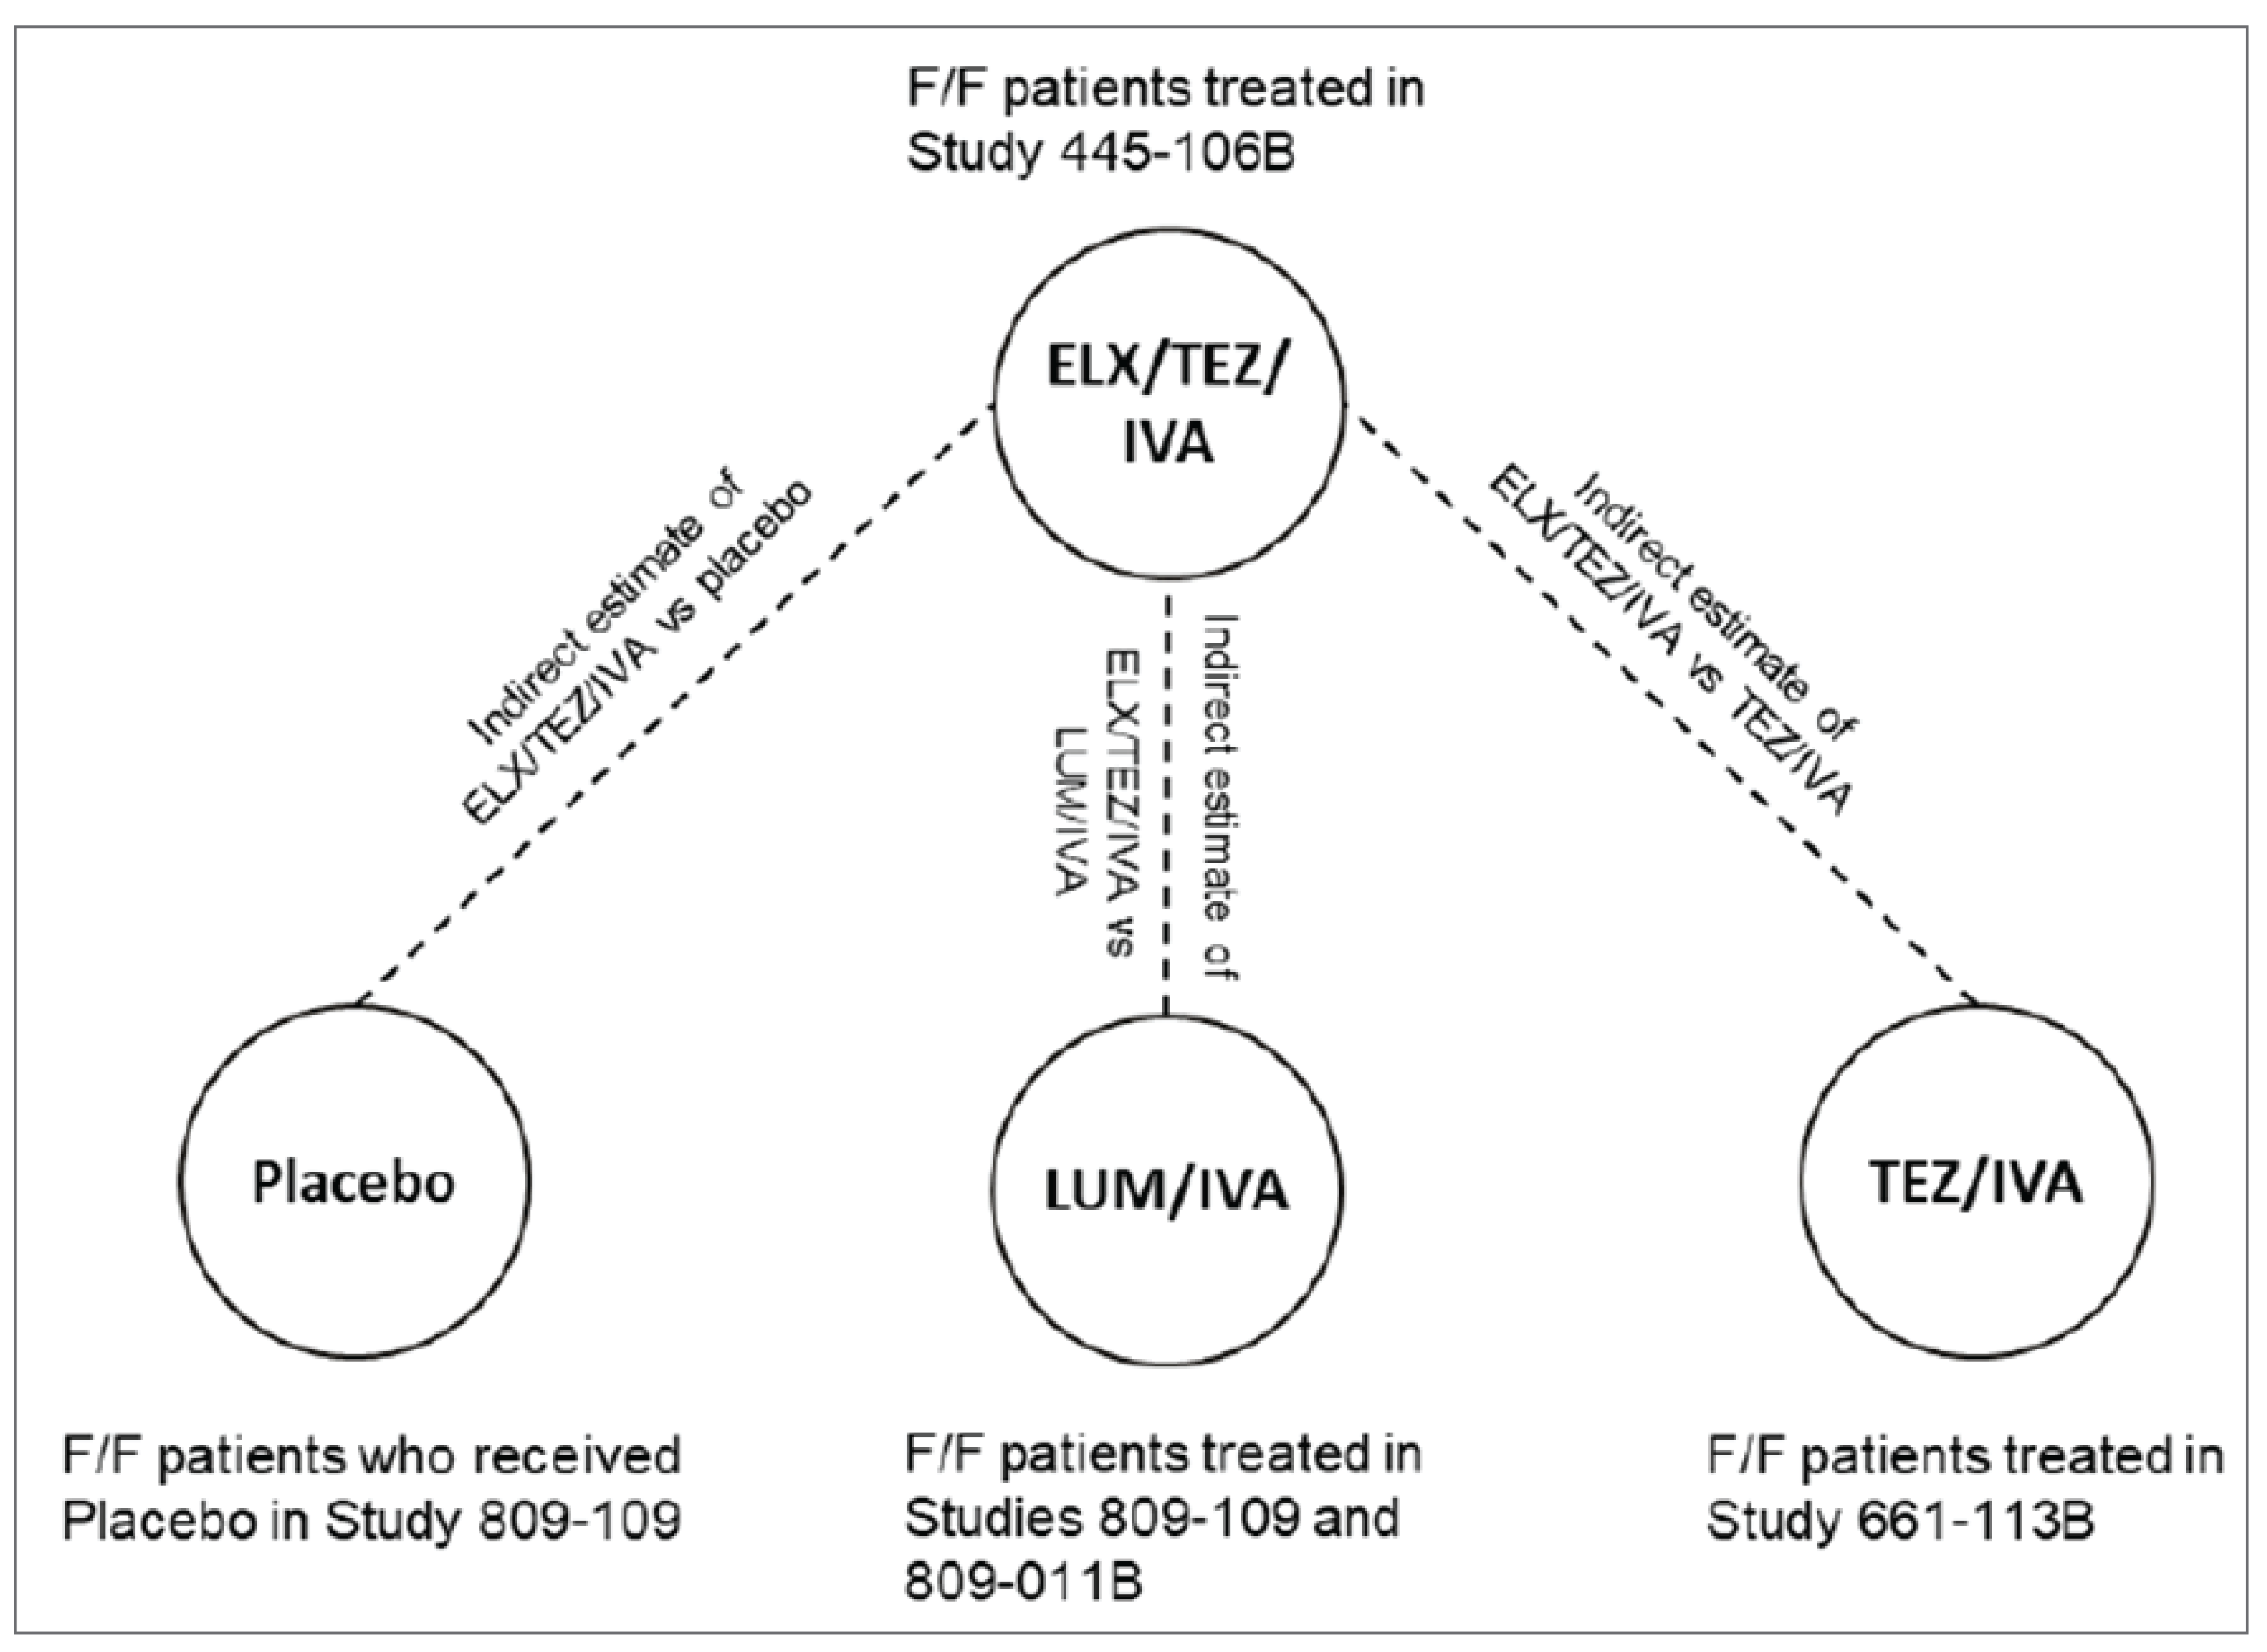 Figure shows the indirect comparison evidence network for patients aged 6 to 11 years who are homozygous for the F508del mutation in the CFTR gene.